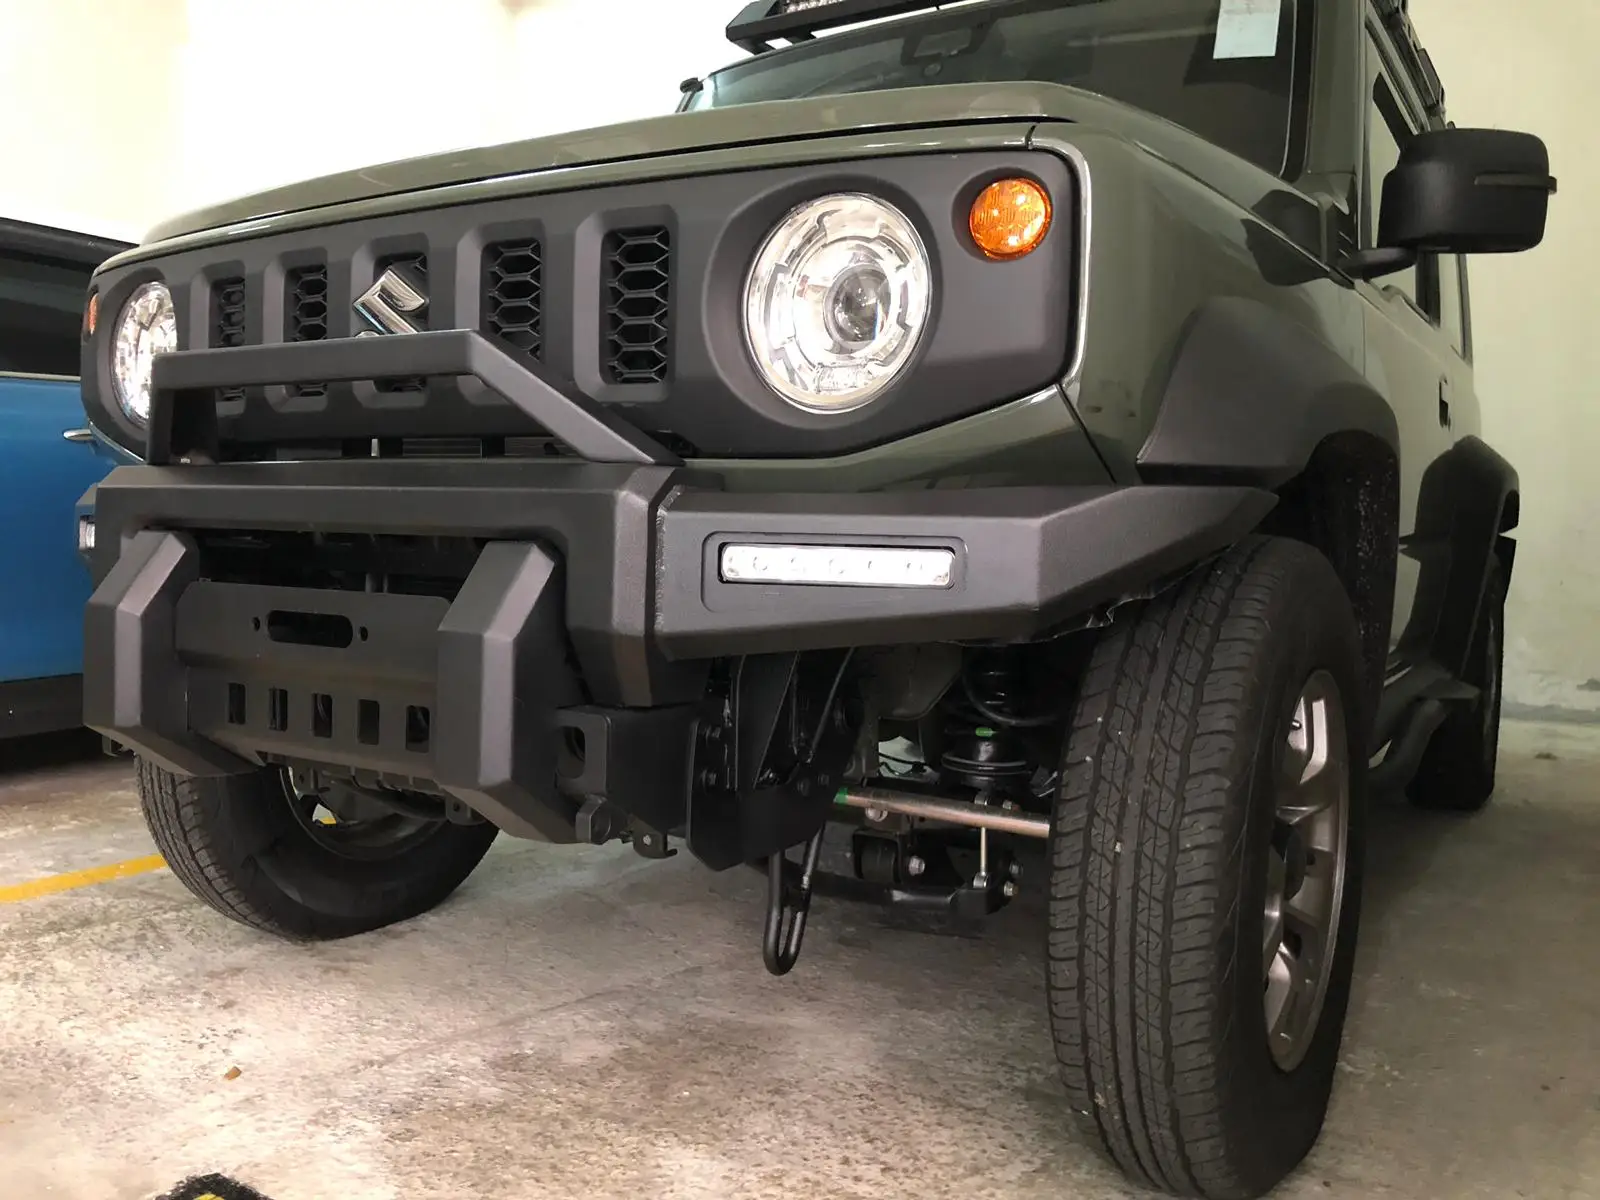 Barry dramatisk Meyella Wholesaler Auto Accesorios Bumper Kit For Suzuki Jimny 2018+ Off Road 4x4  Parts Bumper 7 Days Delivery In Guangzhou - Buy Suzuki Kits 4x4,Suzuki Jimny  Accesorios,Suzuki Jimny Bumper Product on Alibaba.com